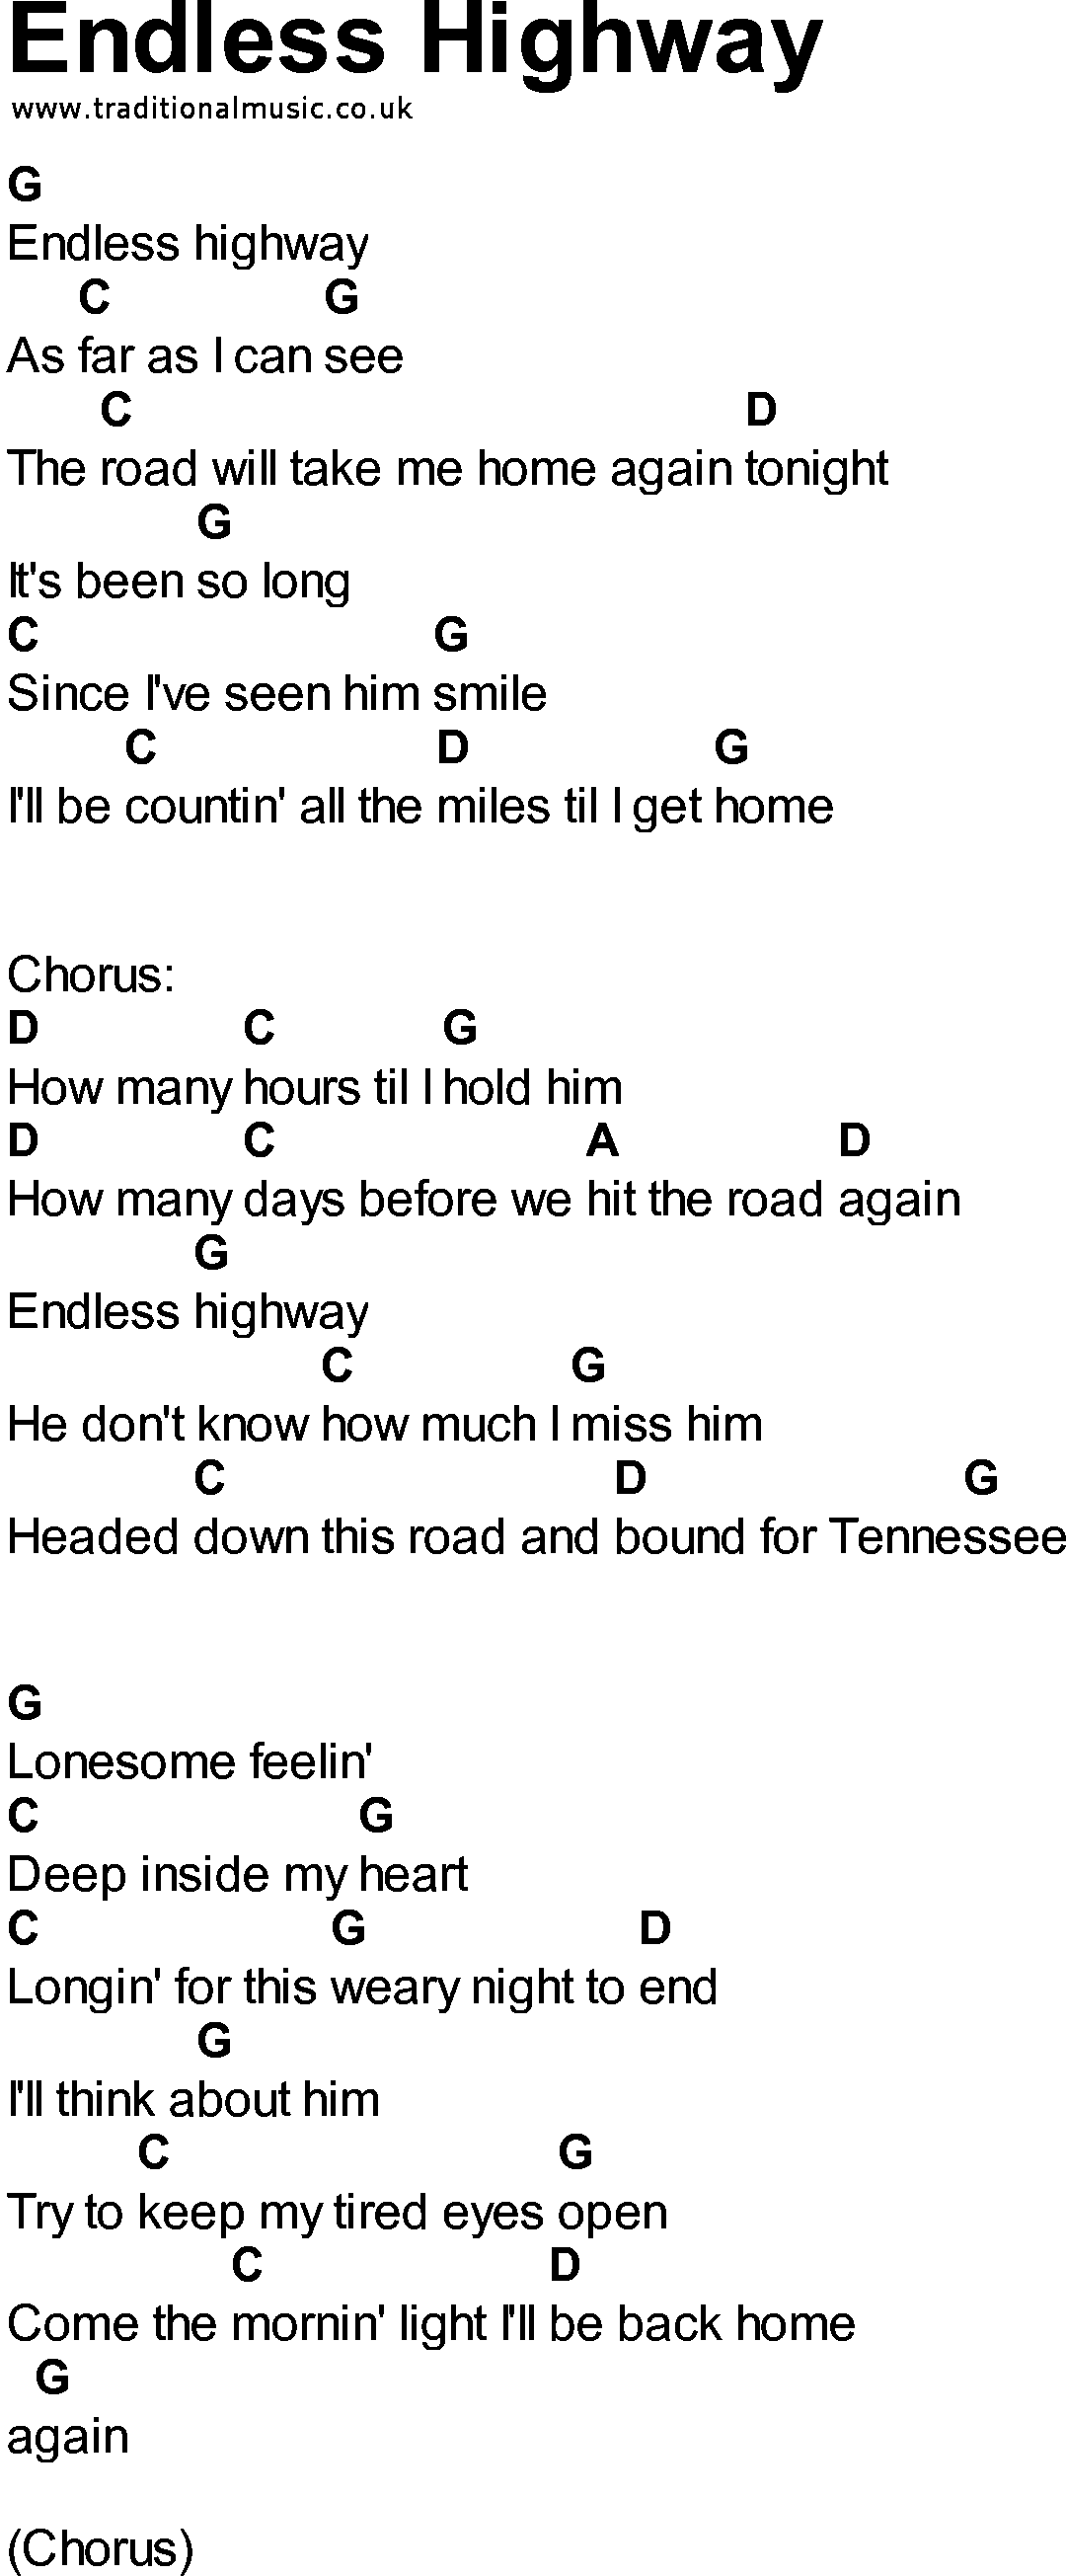 Bluegrass songs with chords - Endless Highway